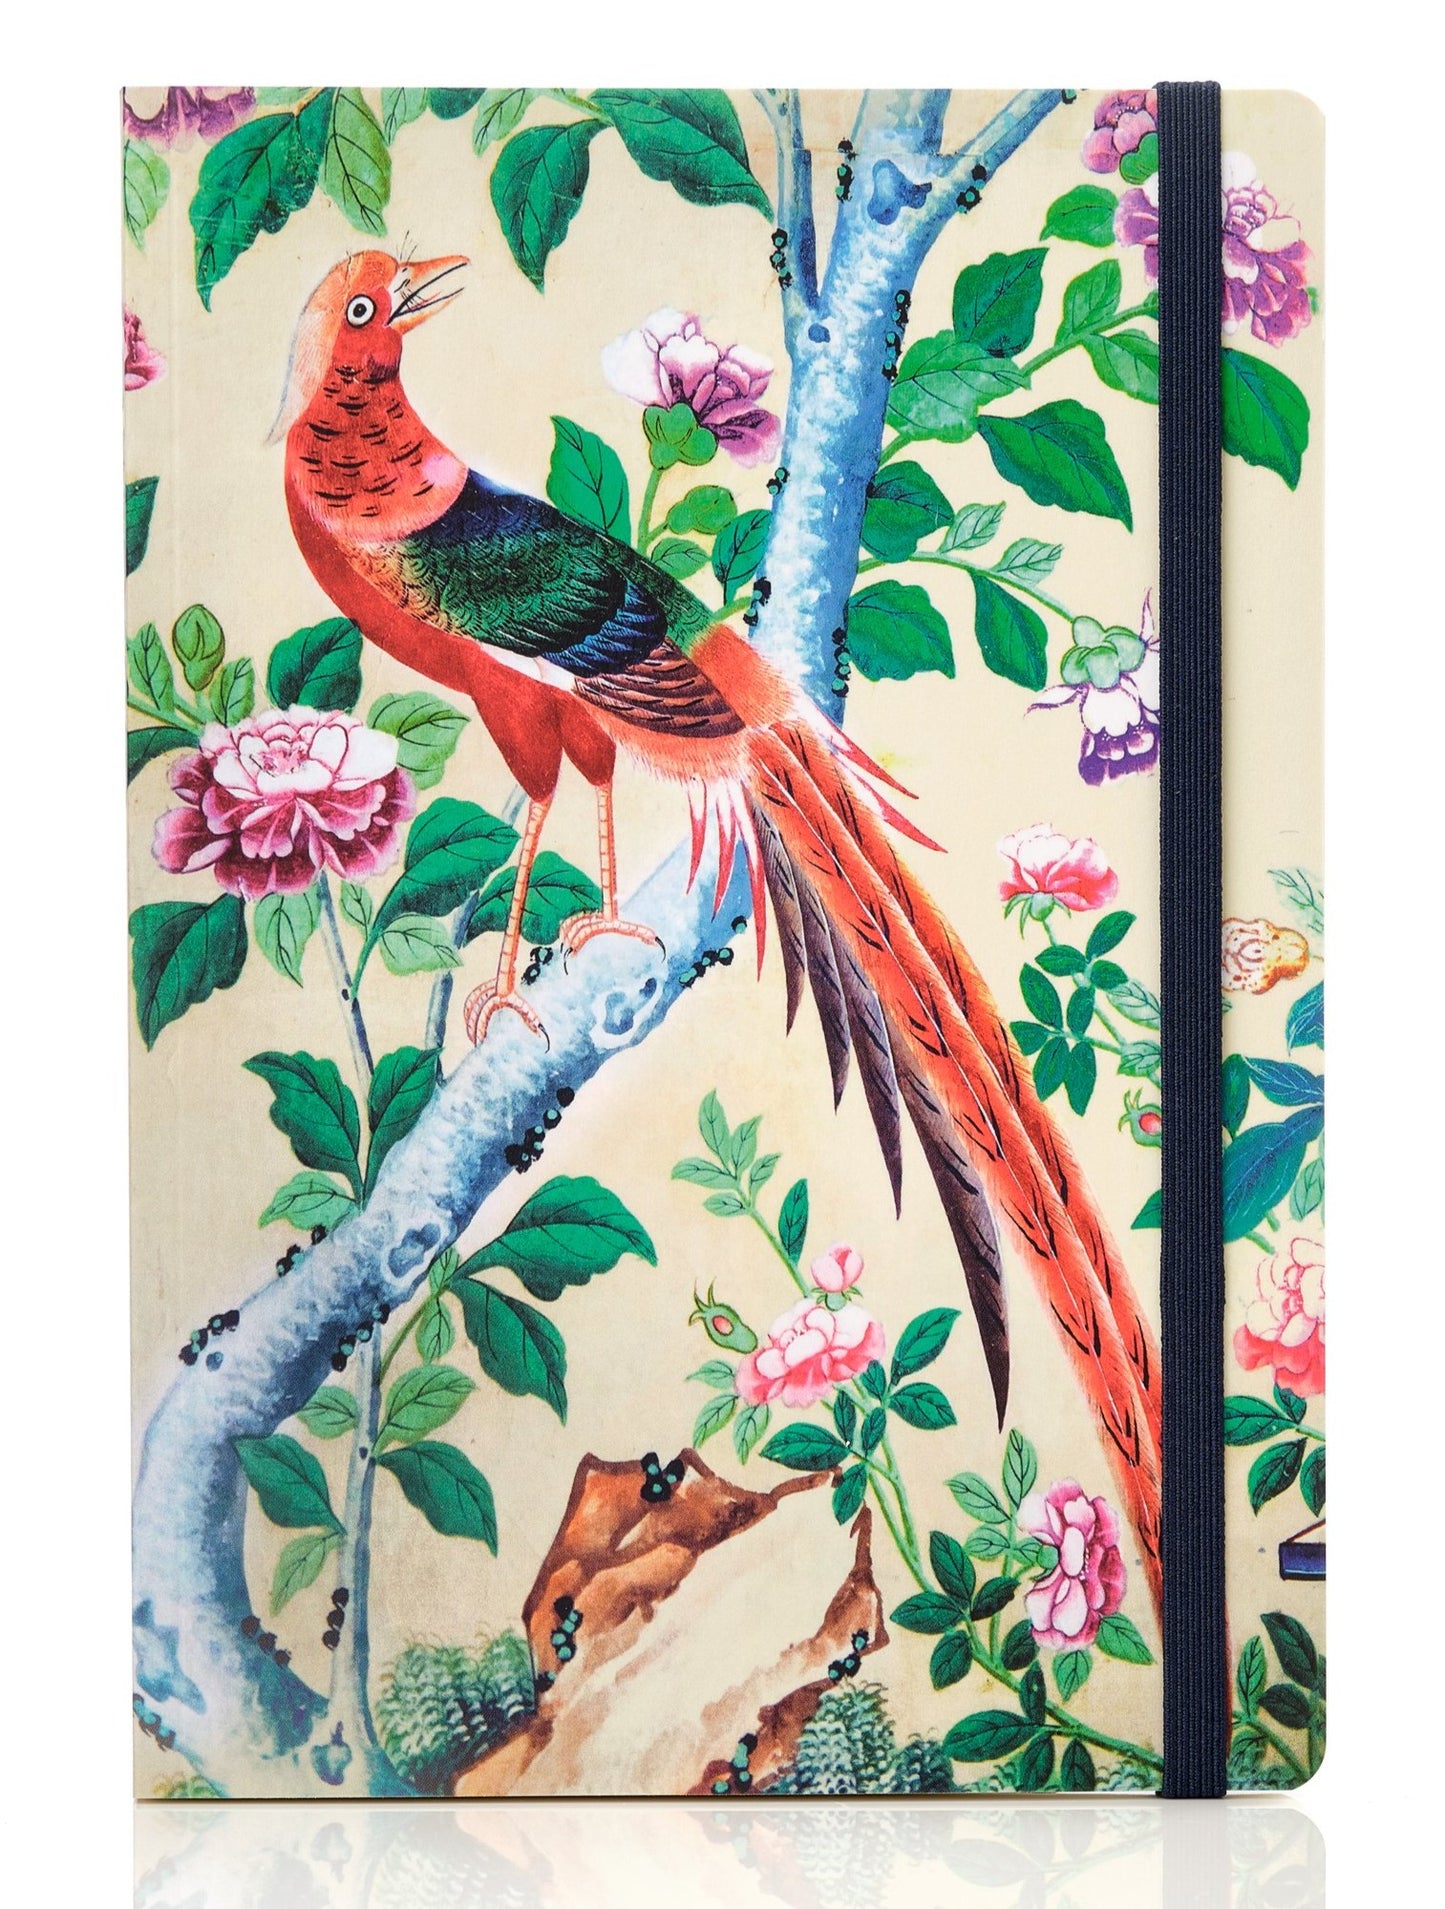 The front of a journal with a bird, leaf and tree branch design.